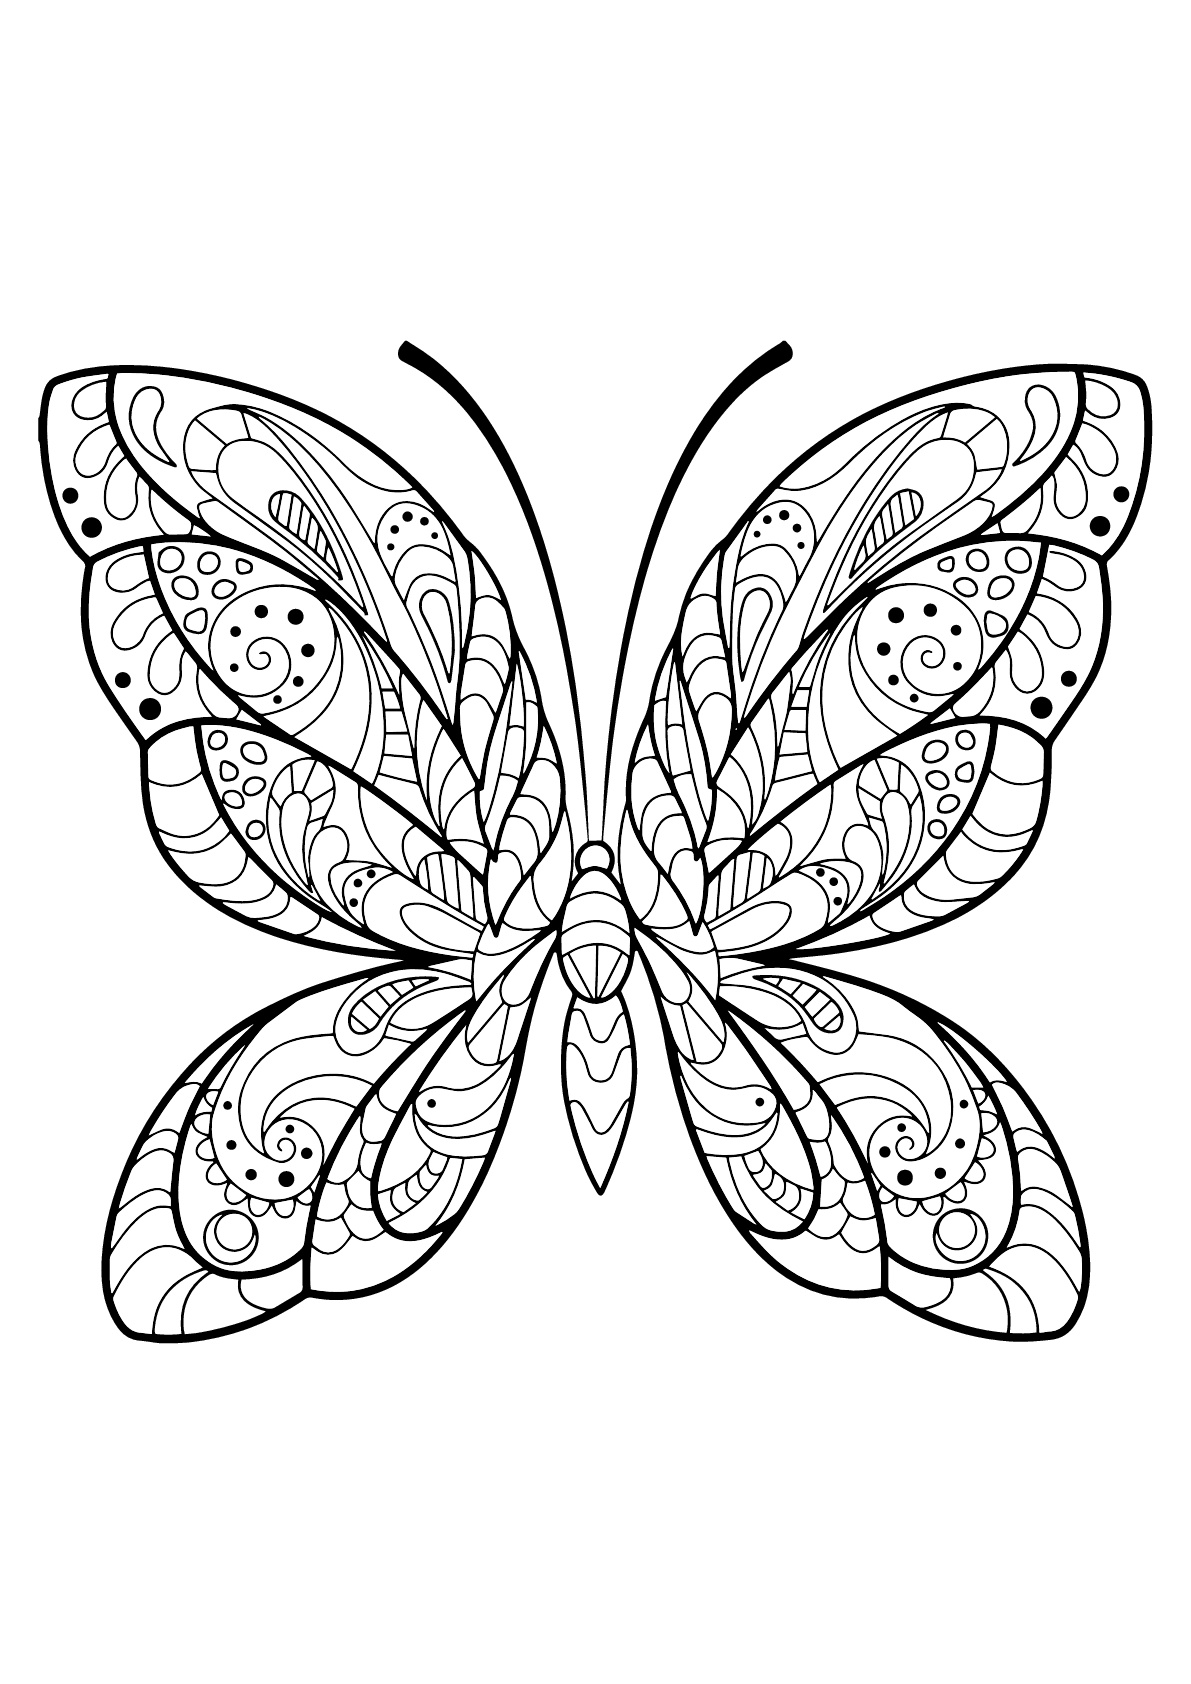 Butterfly with beautiful & intricate patterns - 2